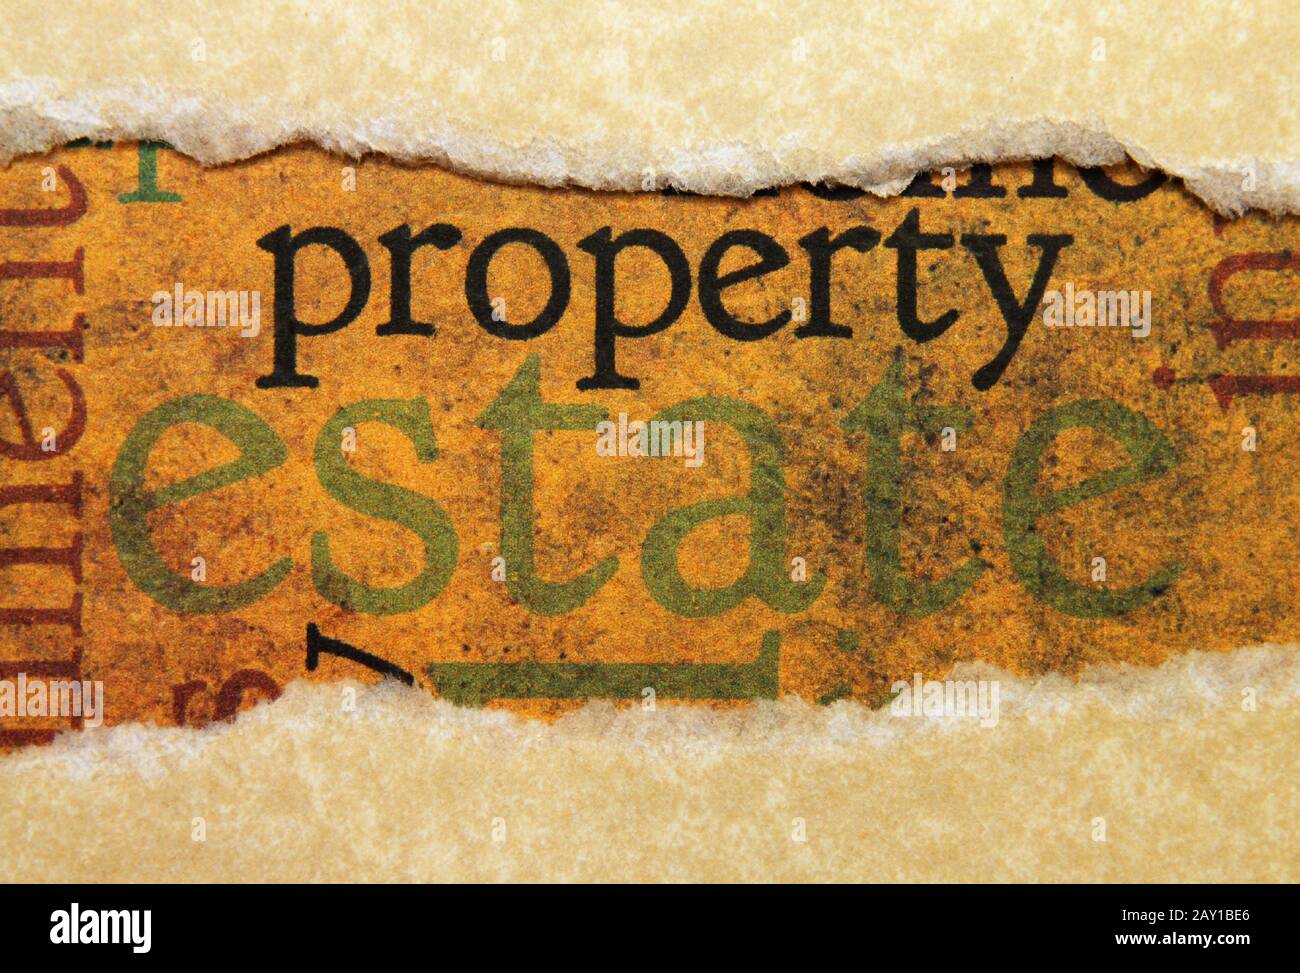 Property and estate concept Stock Photo